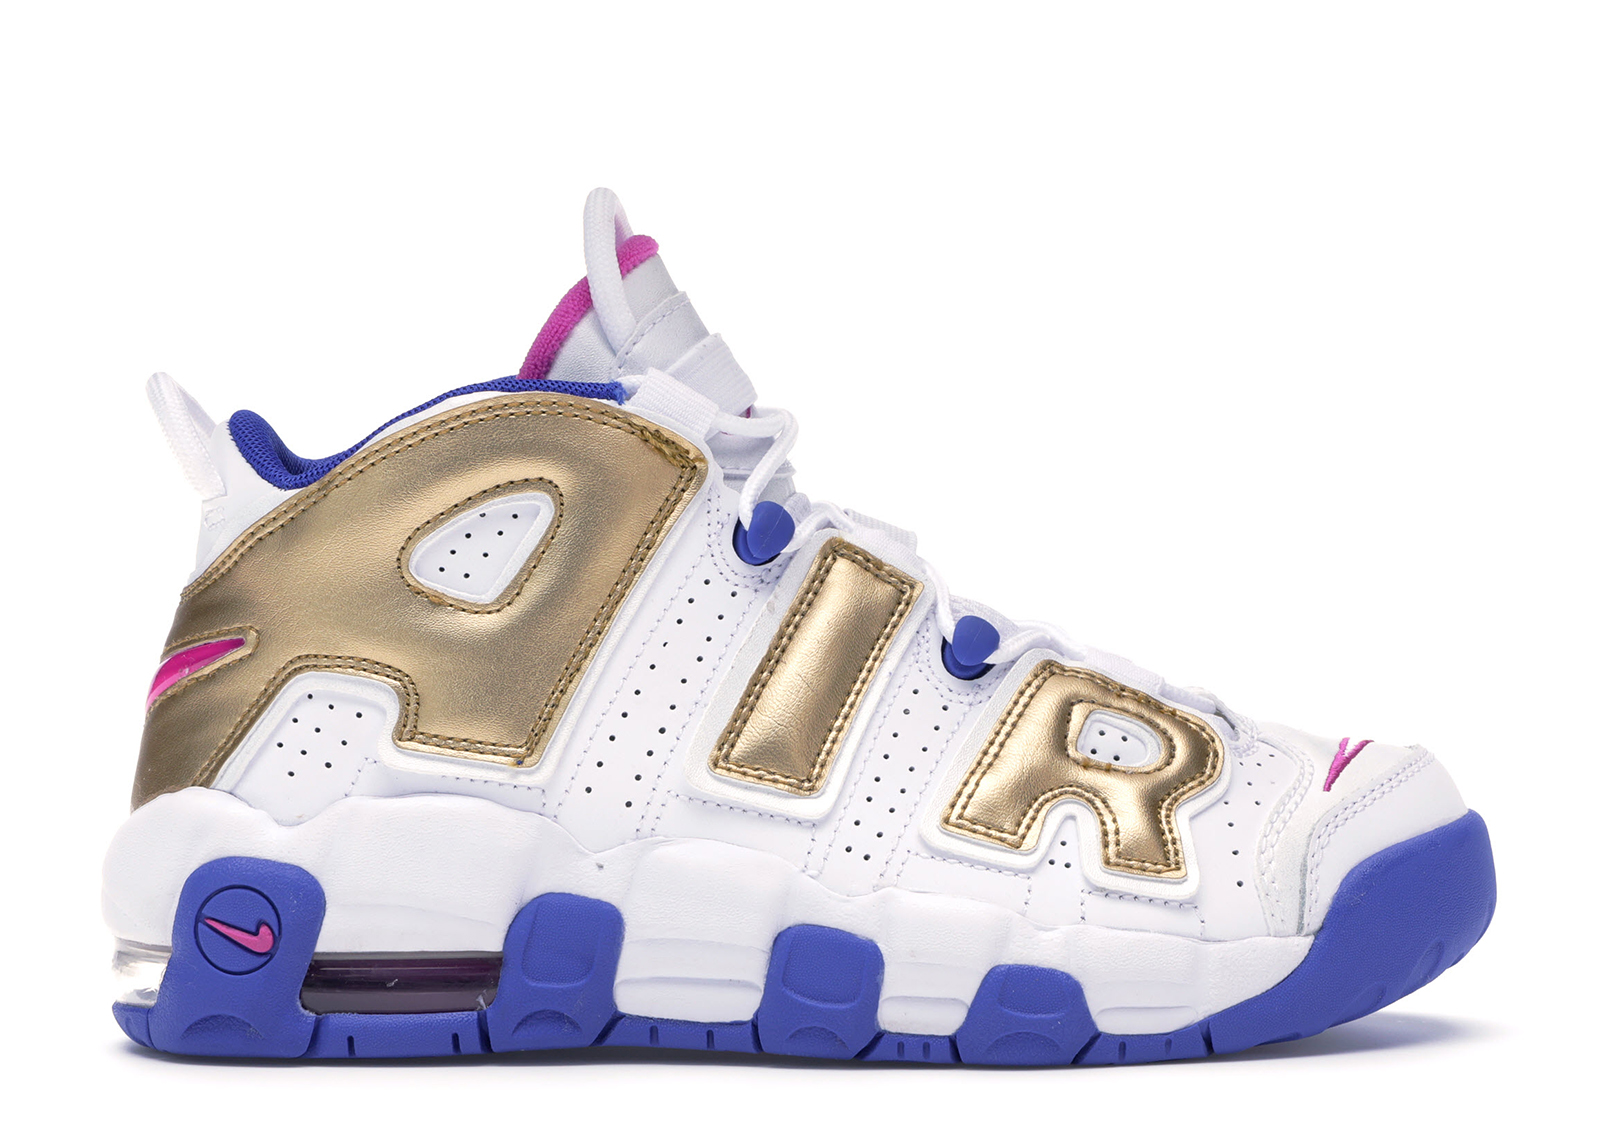 Nike Air More Uptempo Peanut Butter & Jelly (GS)